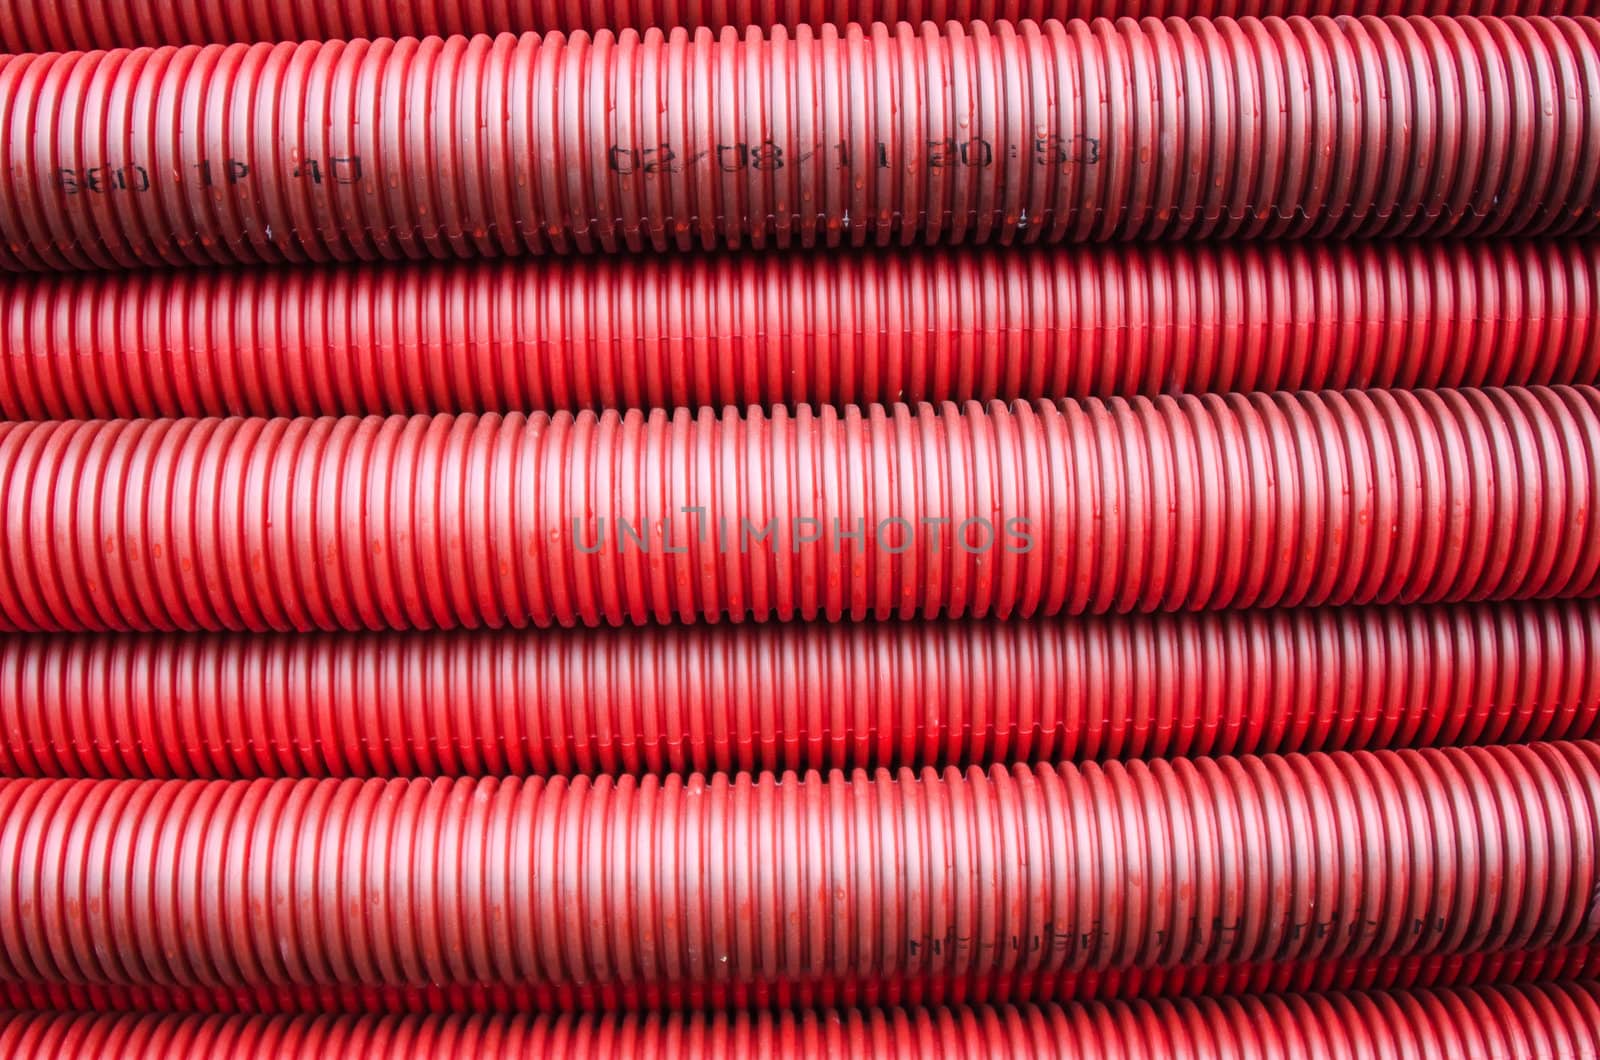 the  red tubing